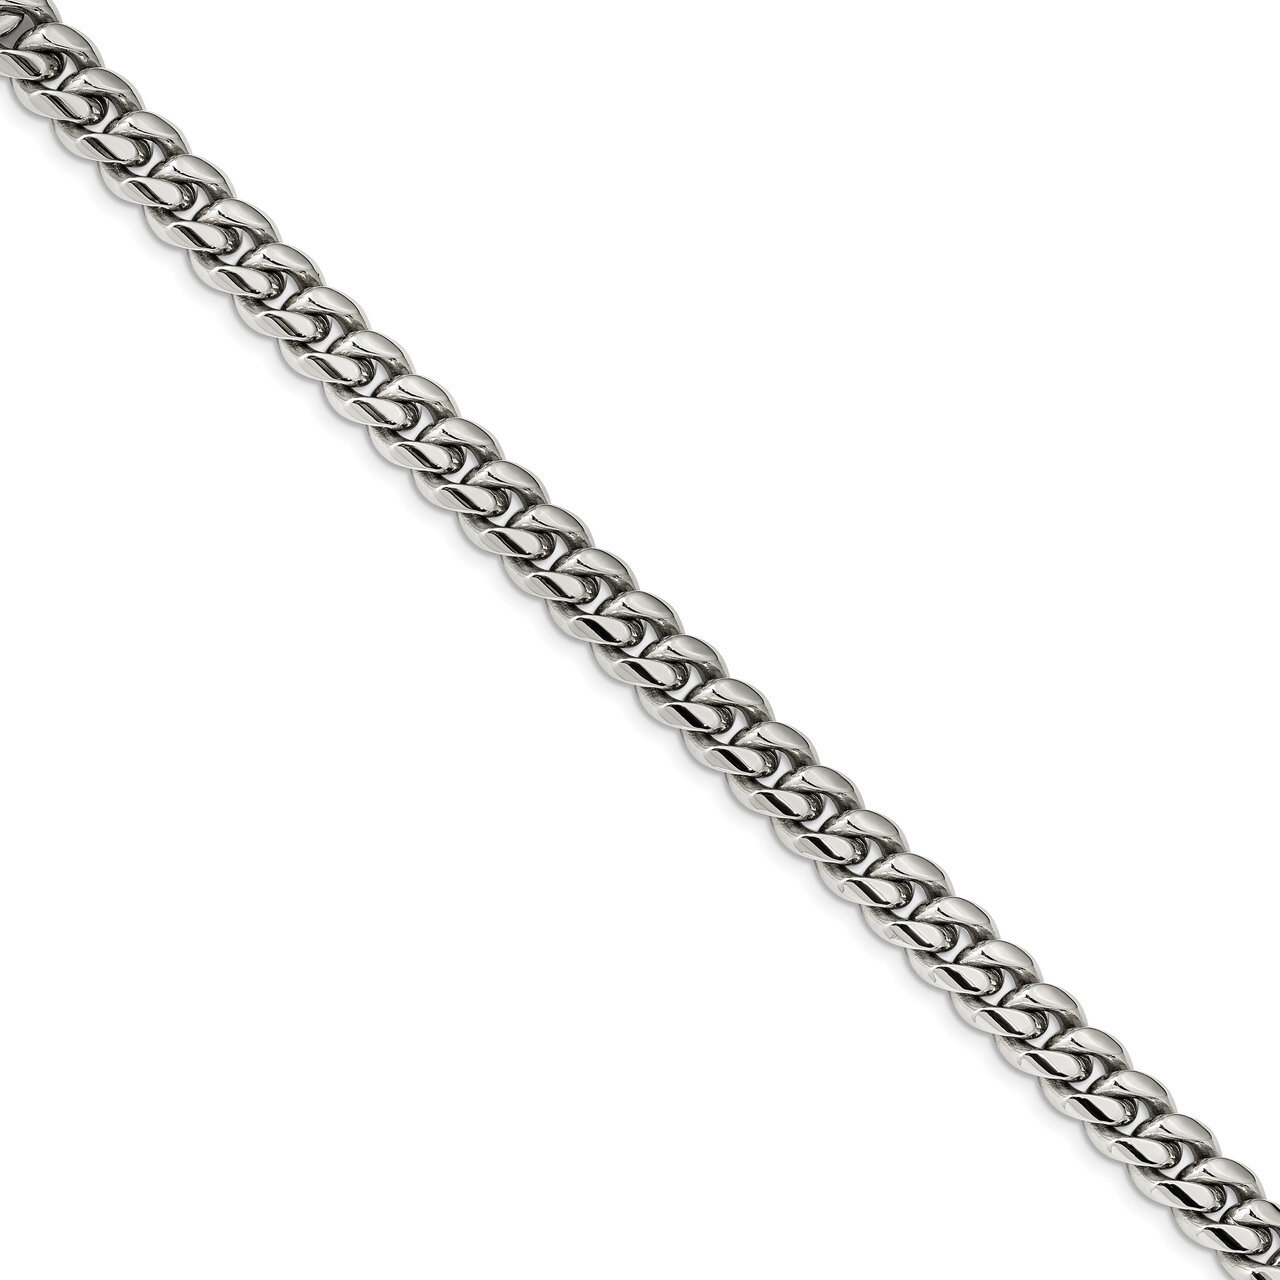 8.25 Inch Curb Chain Bracelet Stainless Steel Polished SRB2224-8.25